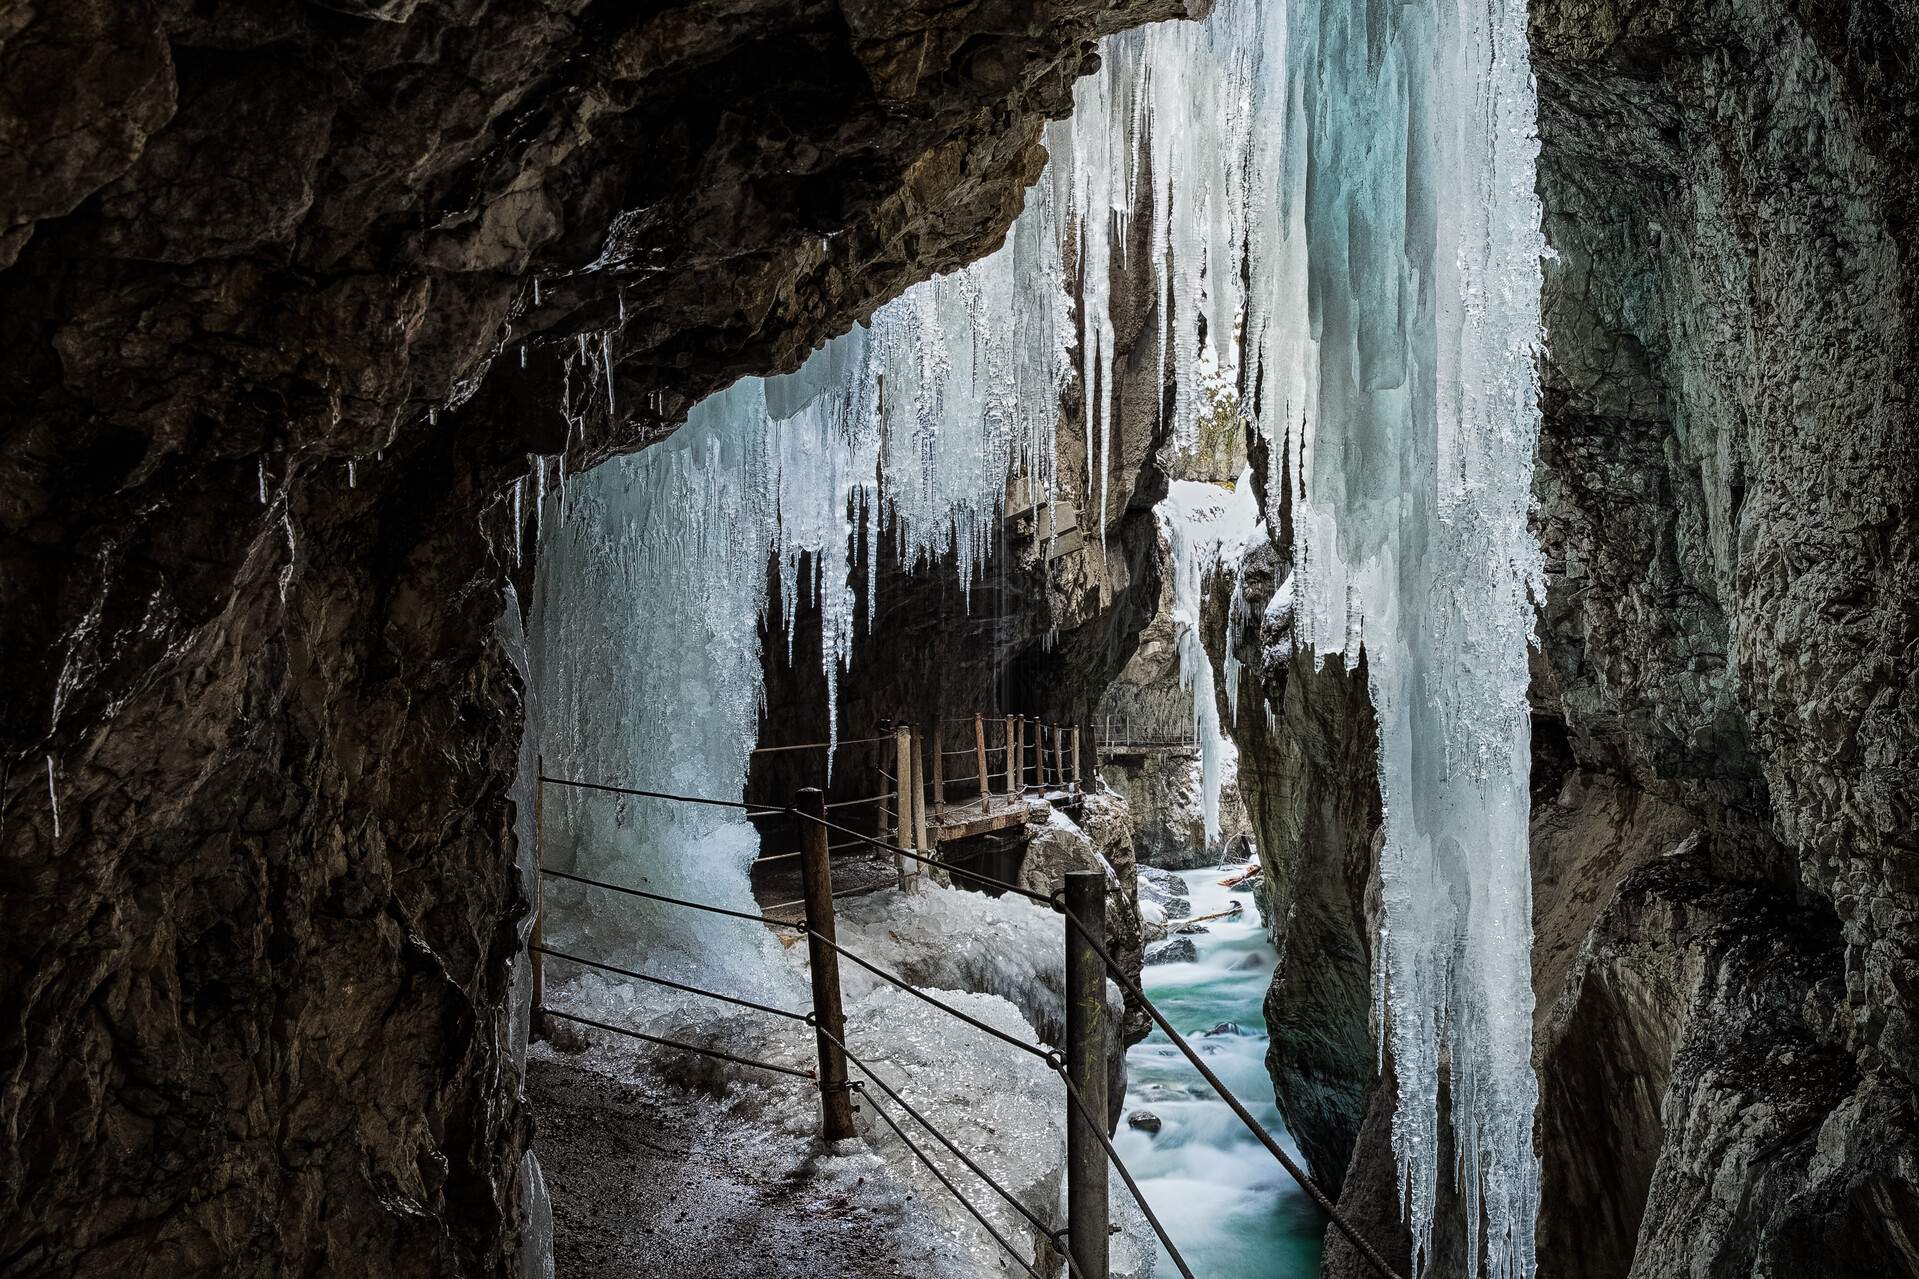 A fenced walkway on the sides of a gorge with massive icicles dangling above a flowing stream.
